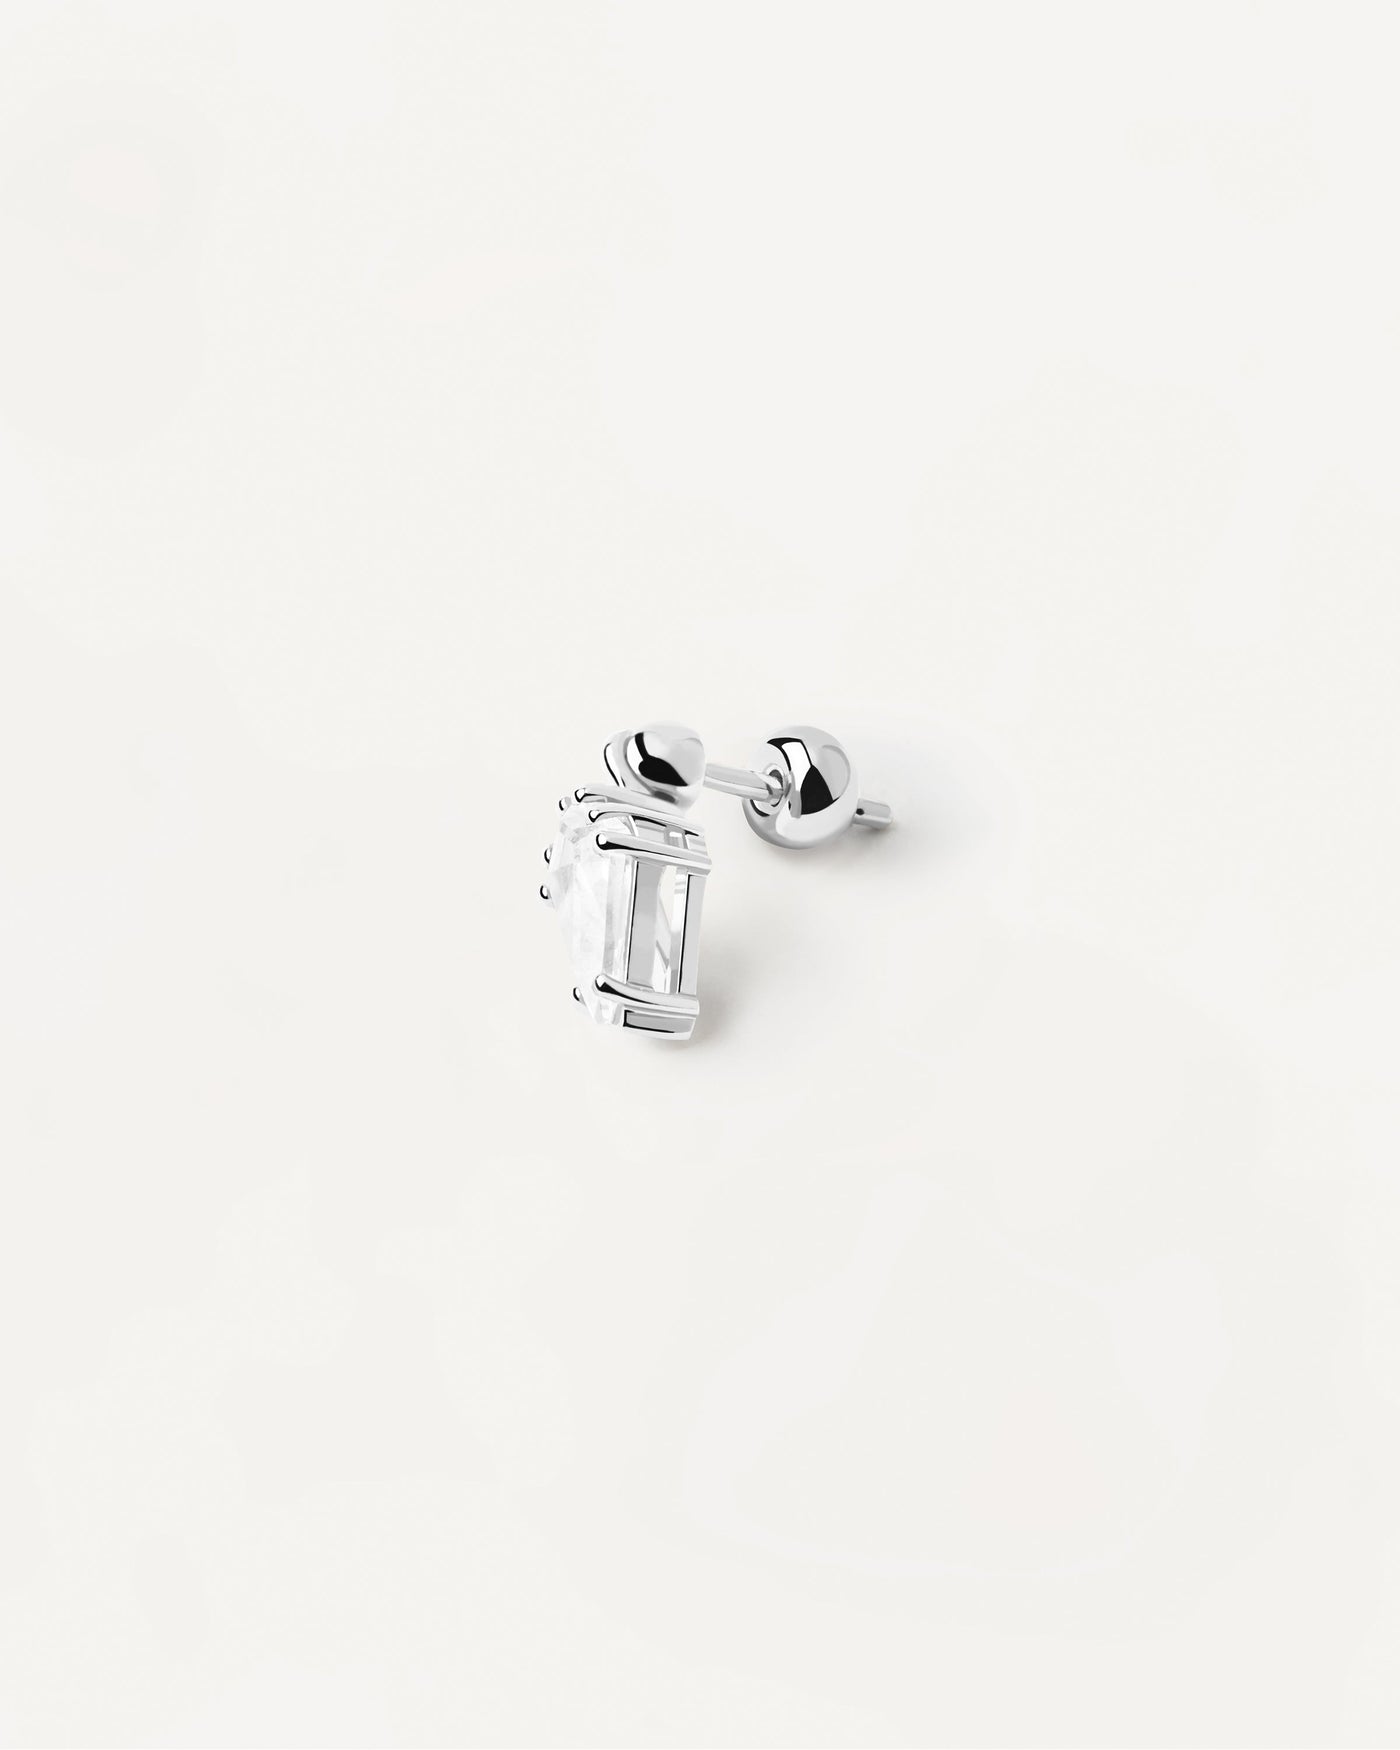 2023 Selection | Lua Single Silver Earring. Sterling silver ear piercing with drop pendant in white zirconia. Get the latest arrival from PDPAOLA. Place your order safely and get this Best Seller. Free Shipping.